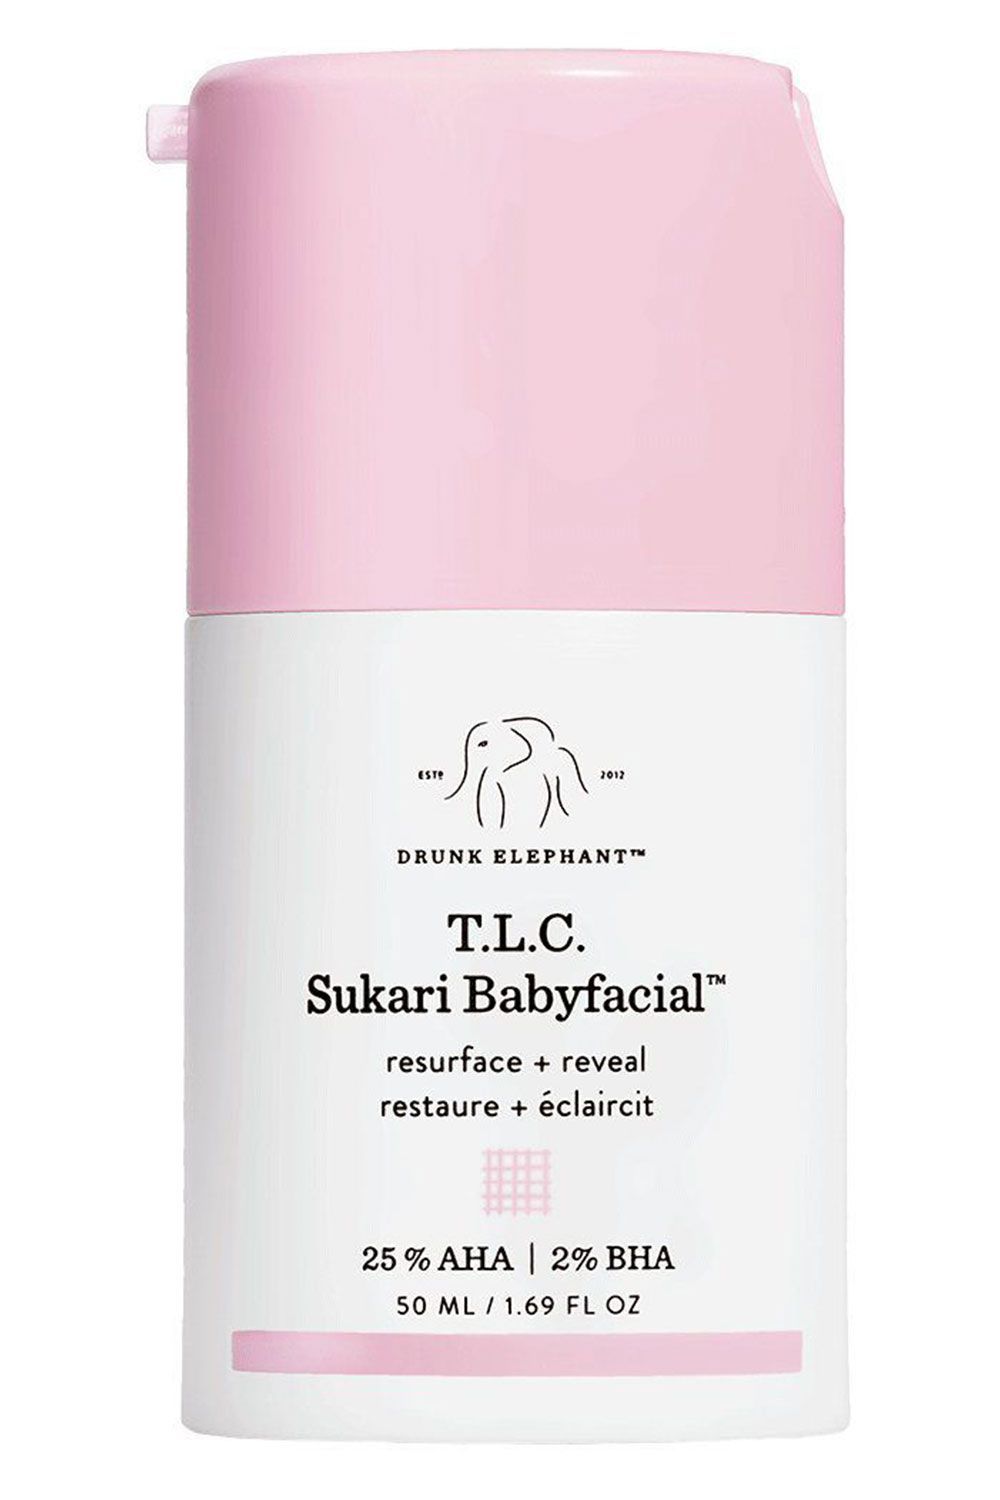 Drunk Elephant T.L.C. Sukari Babyfacial. AHA/BHA Face Mask for Great Skin Clarity, Texture and Tone for a Youthful Radiance. (1.69 Fl Oz).